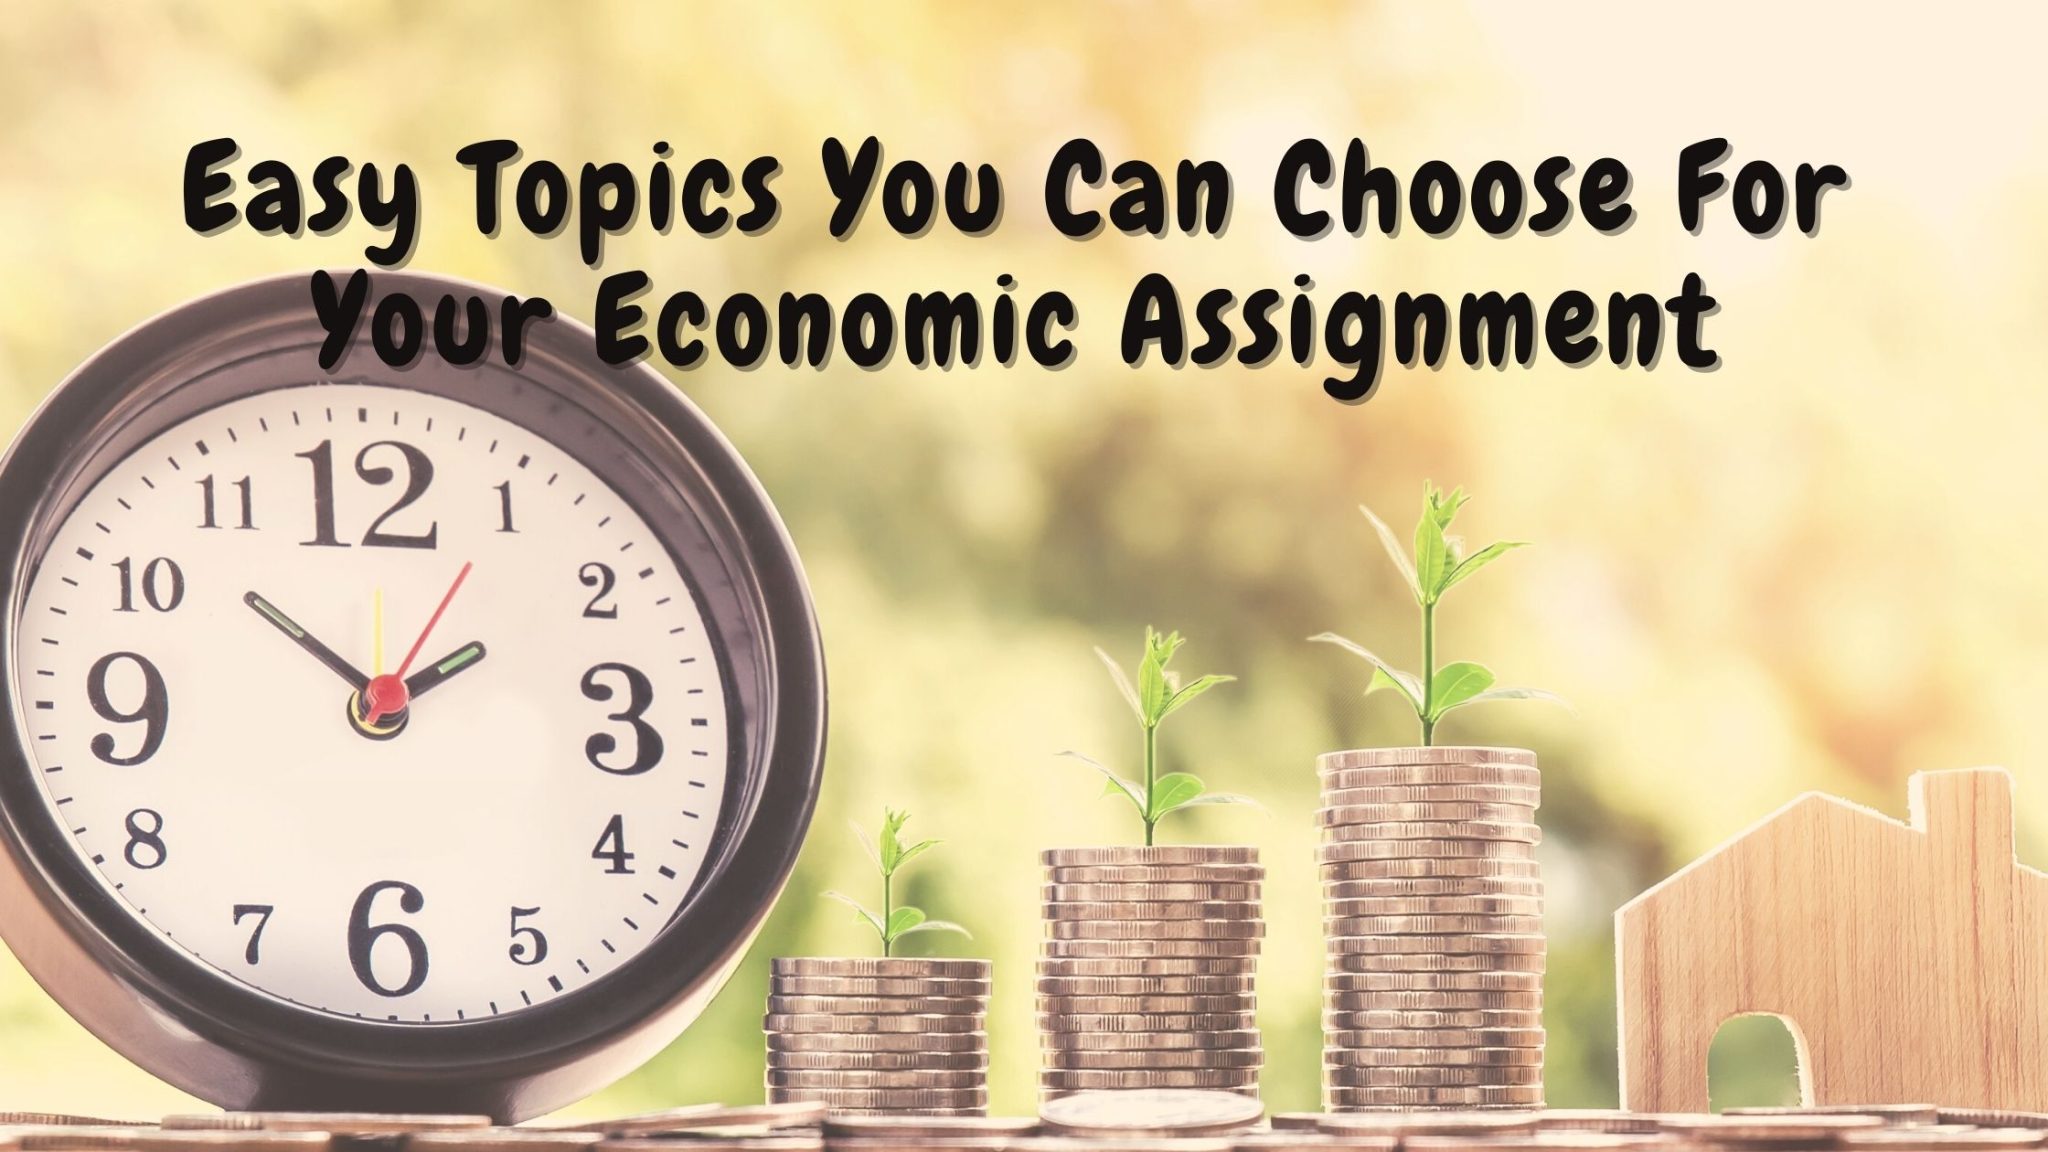 Easy Topics You Can Choose For Your Economic Assignment